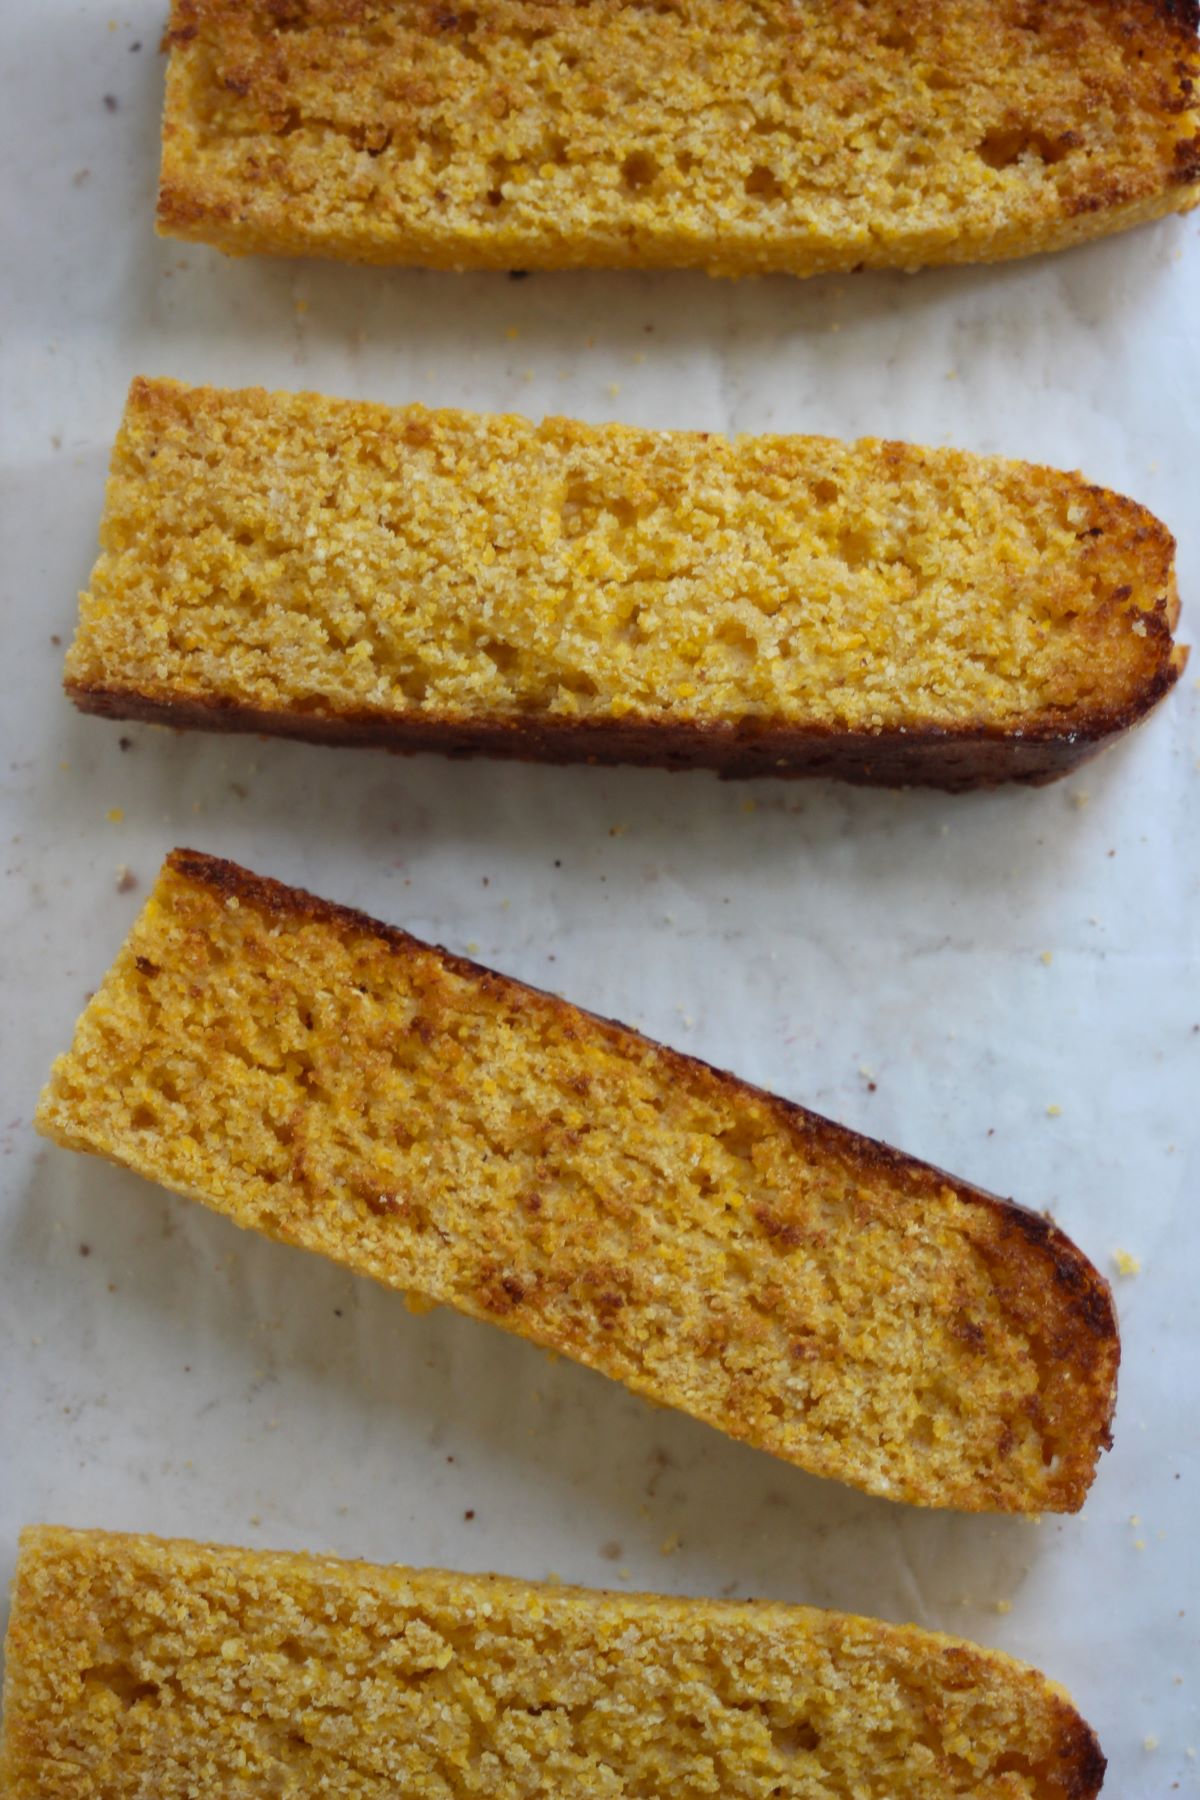 Slices of corn bread seen from above on a white surface.